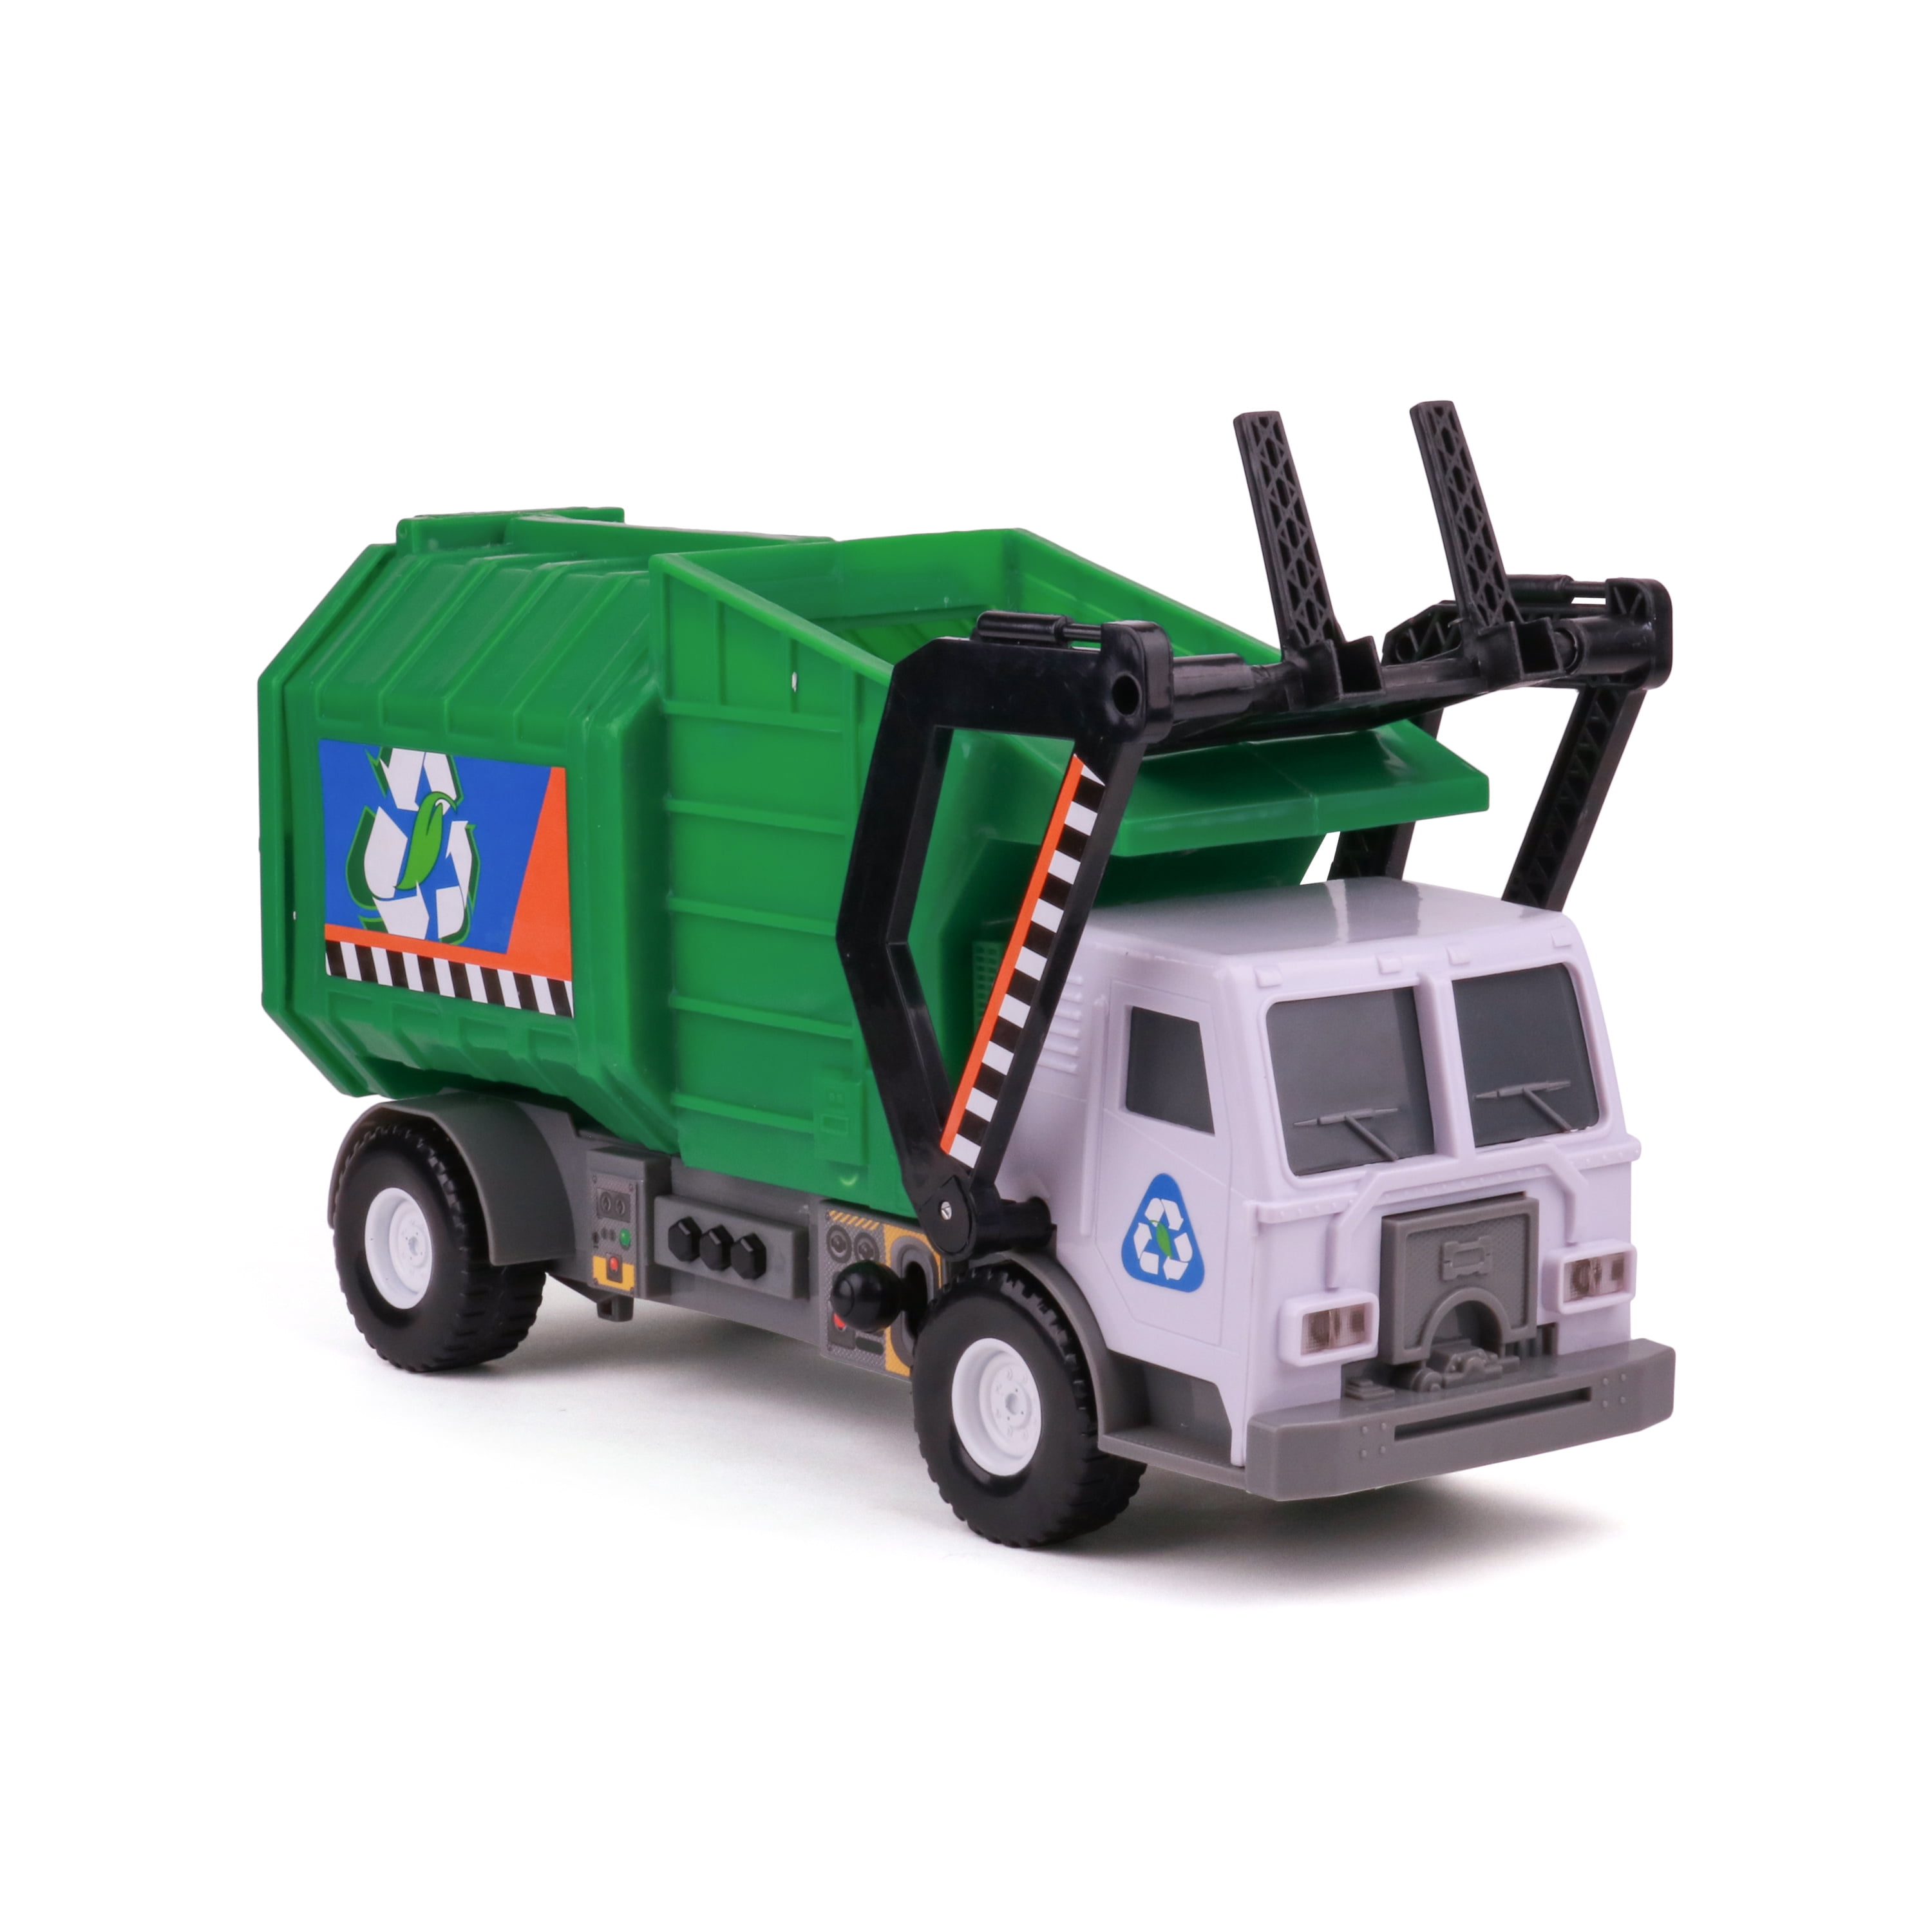 Tonka Built To Last Mighty Motorized Garbage Truck Vehicle w/ Lights & Sounds 